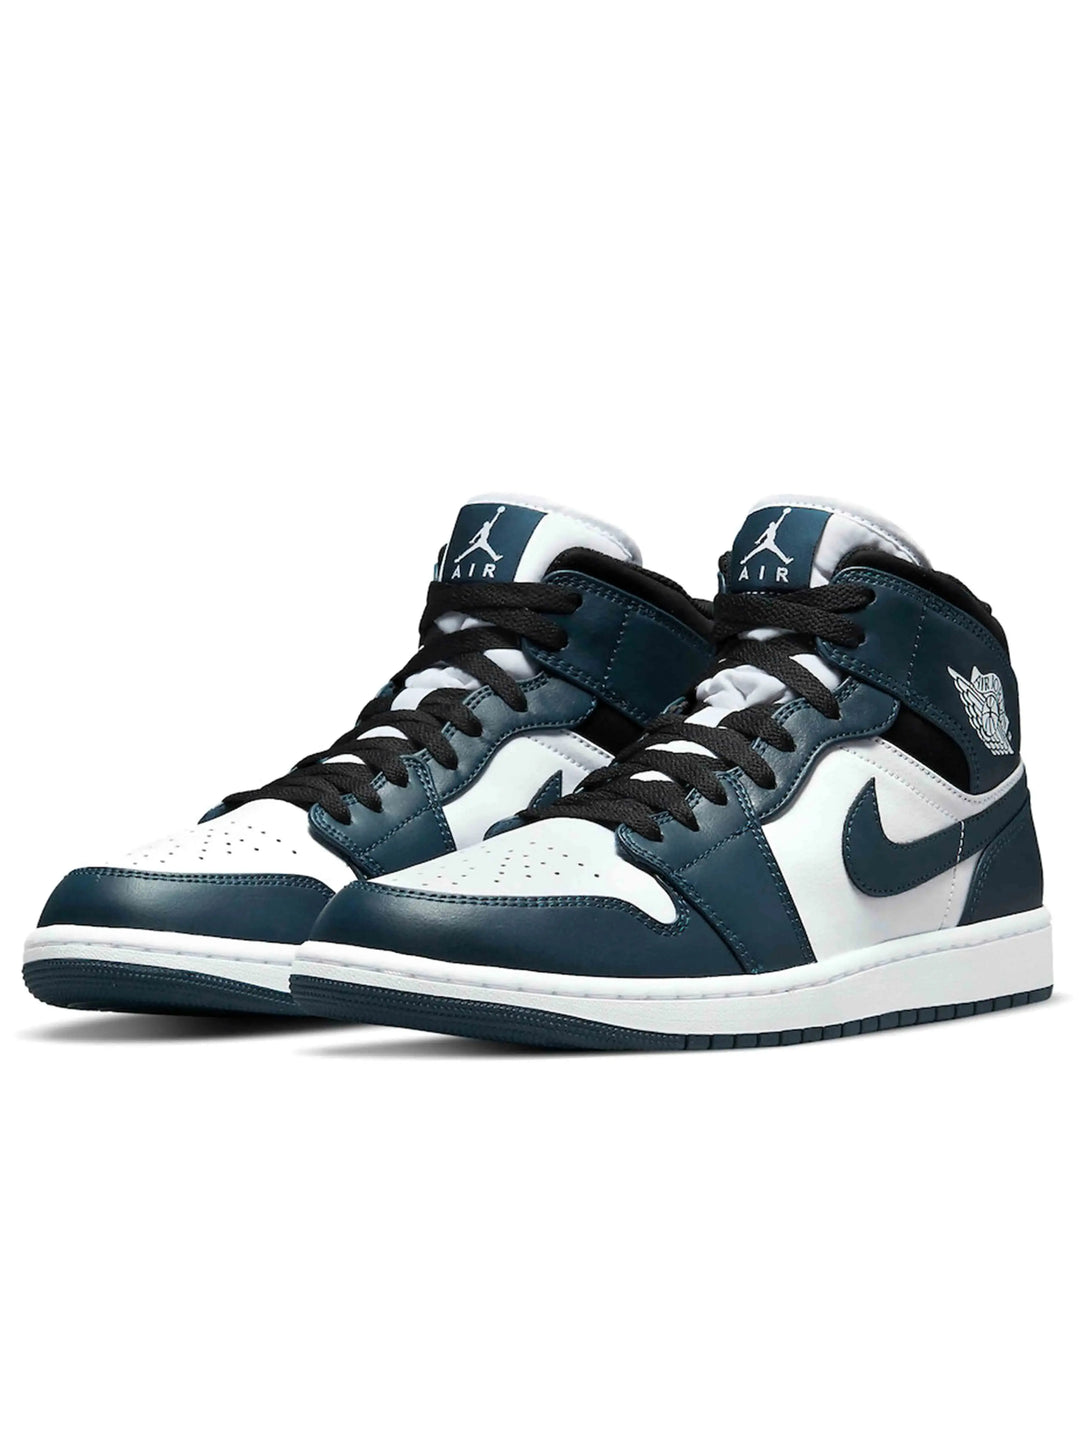 Nike Air Jordan 1 Mid Armory Navy in Auckland, New Zealand - Shop name